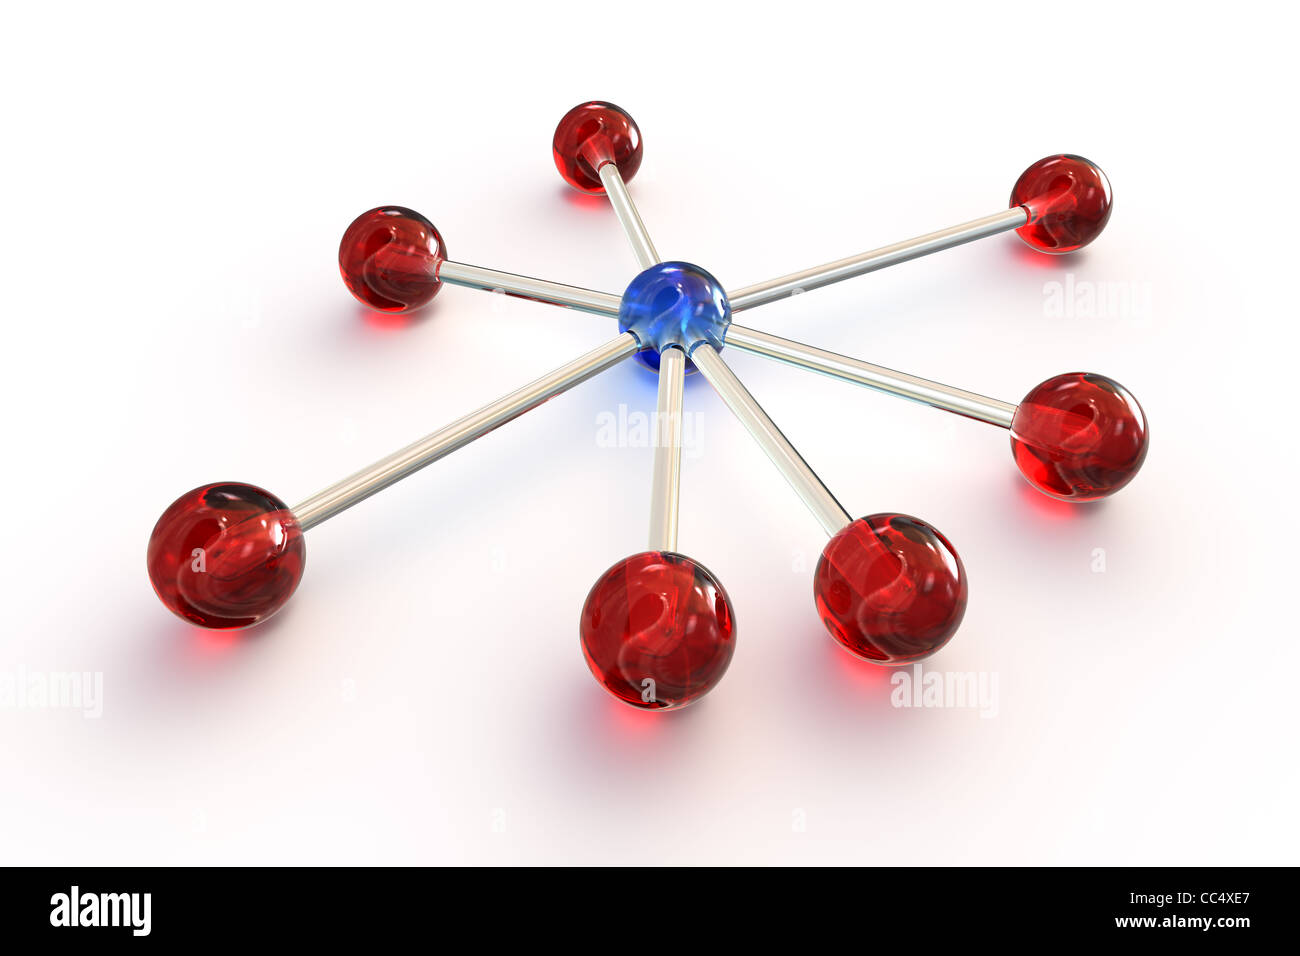 Seven red transparent balls connected to a blue transparent ball Stock Photo